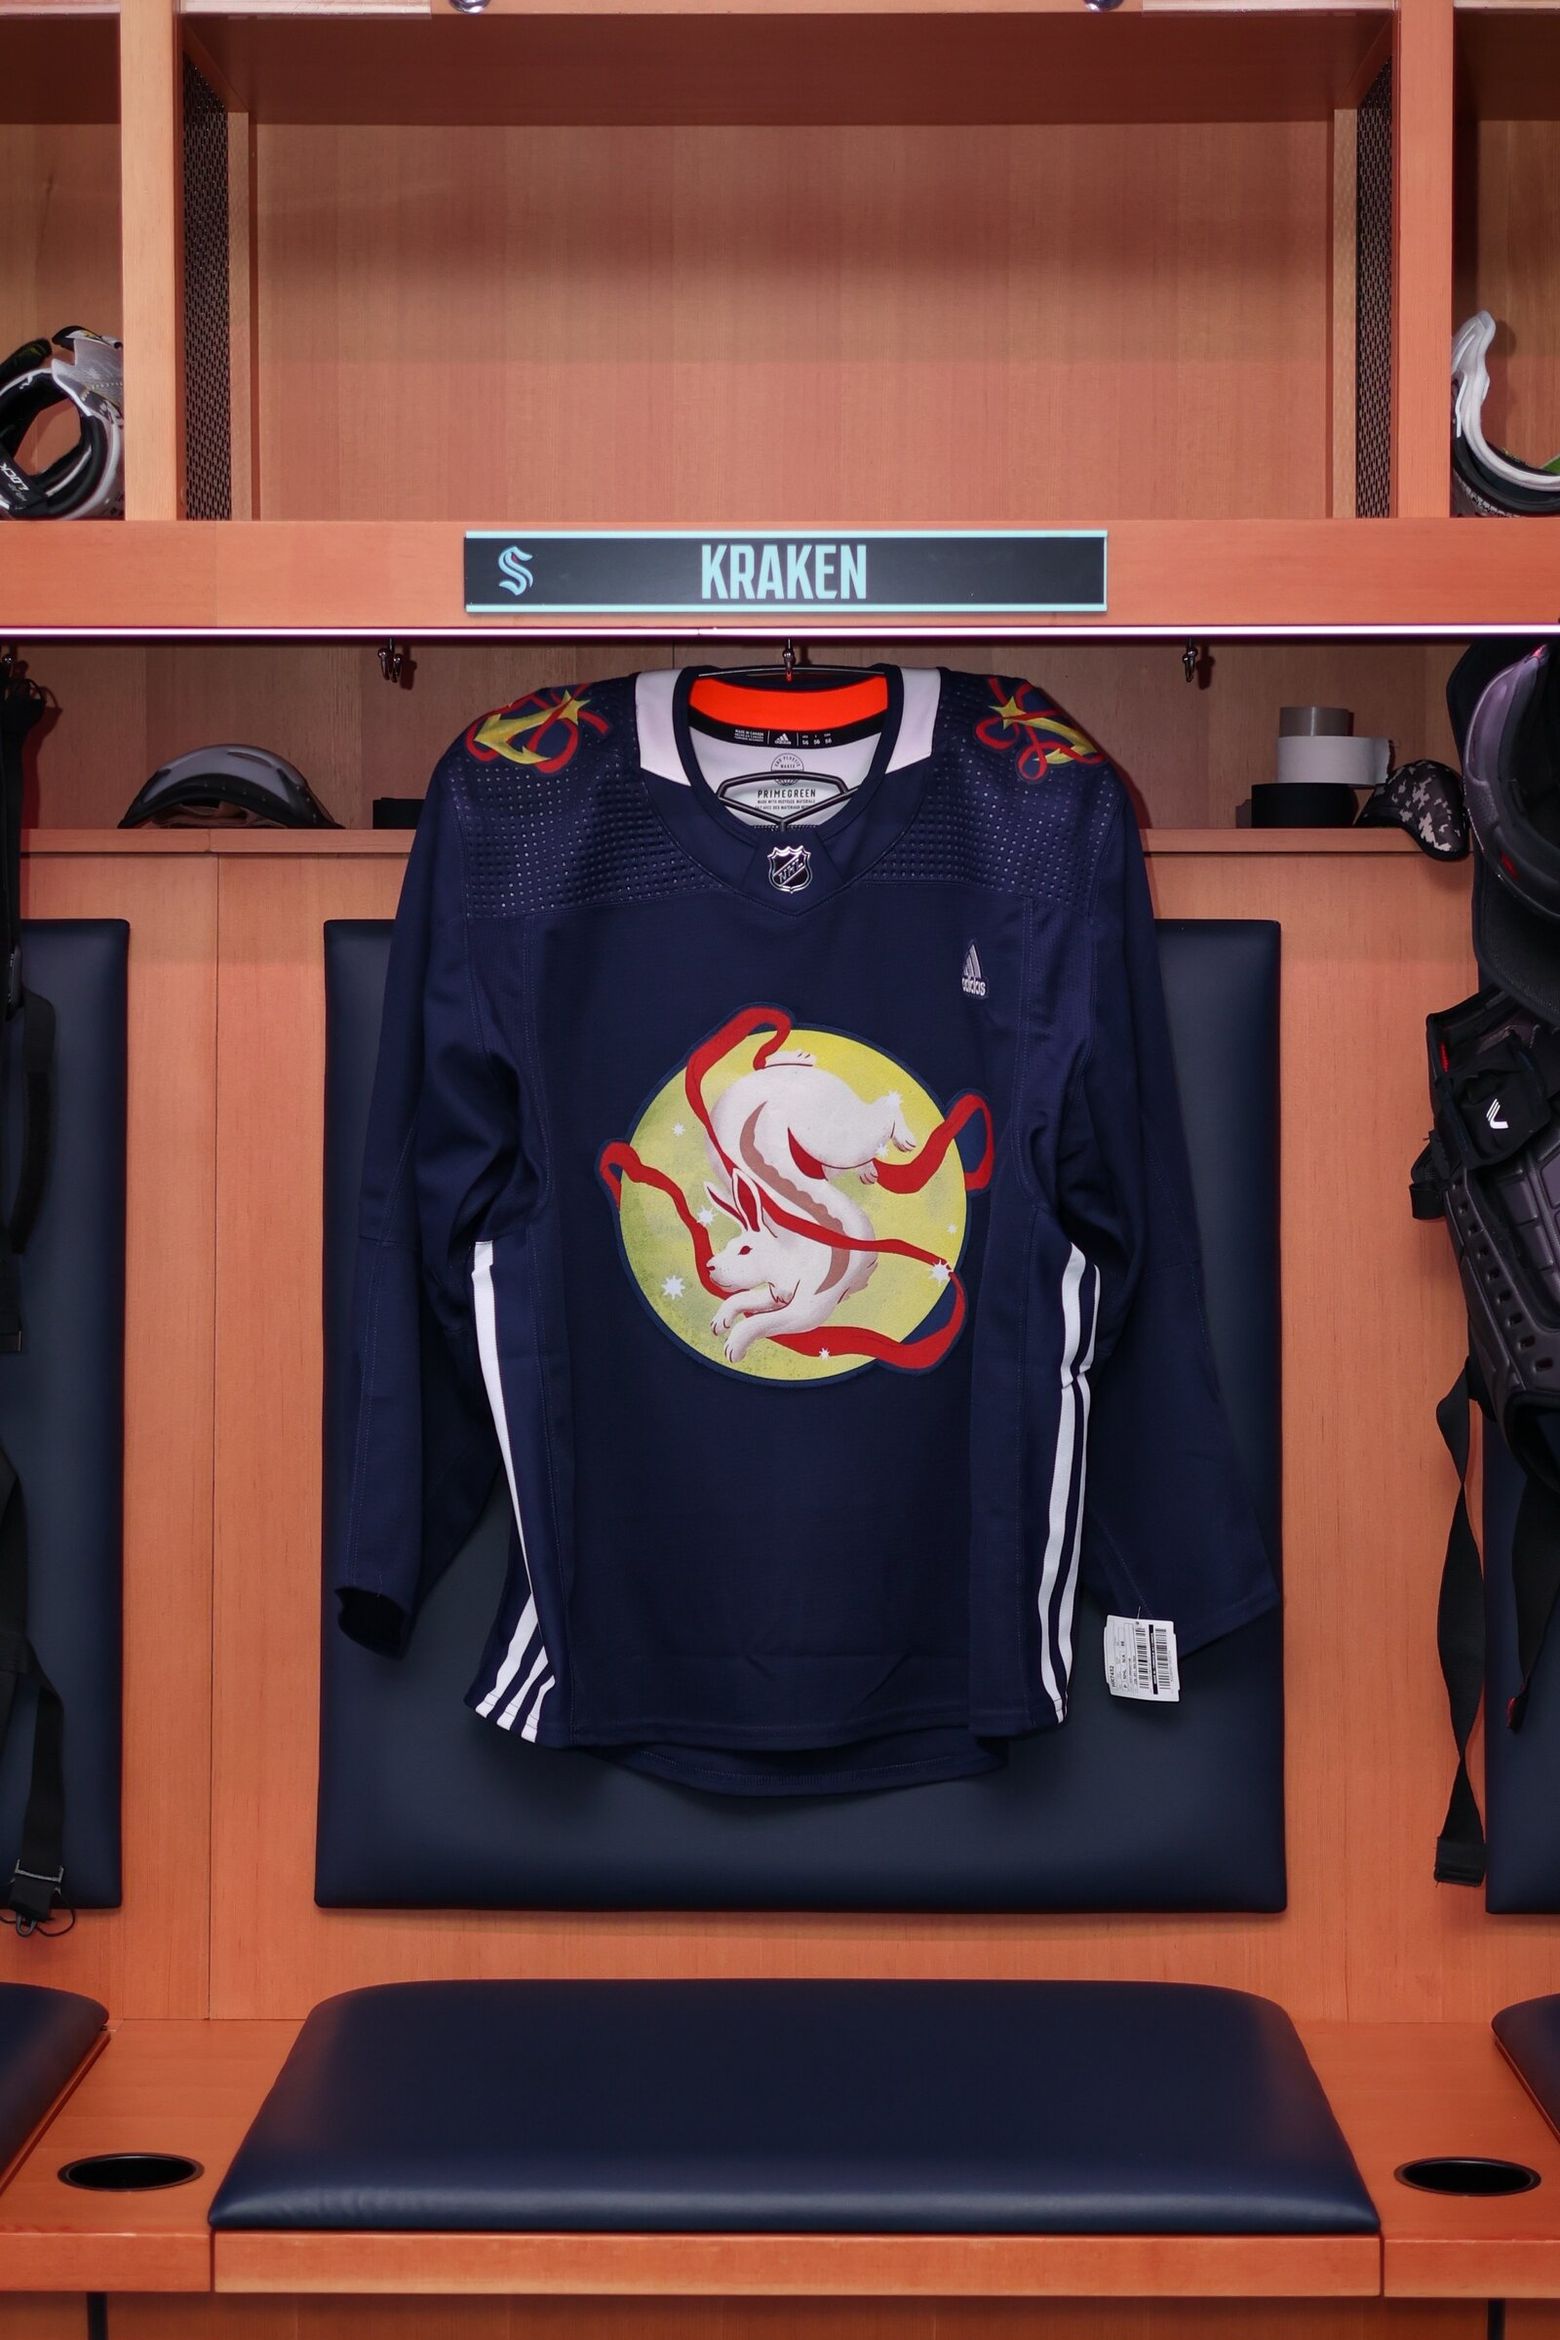 Kraken will have special warmup jerseys for Black History Month on Saturday